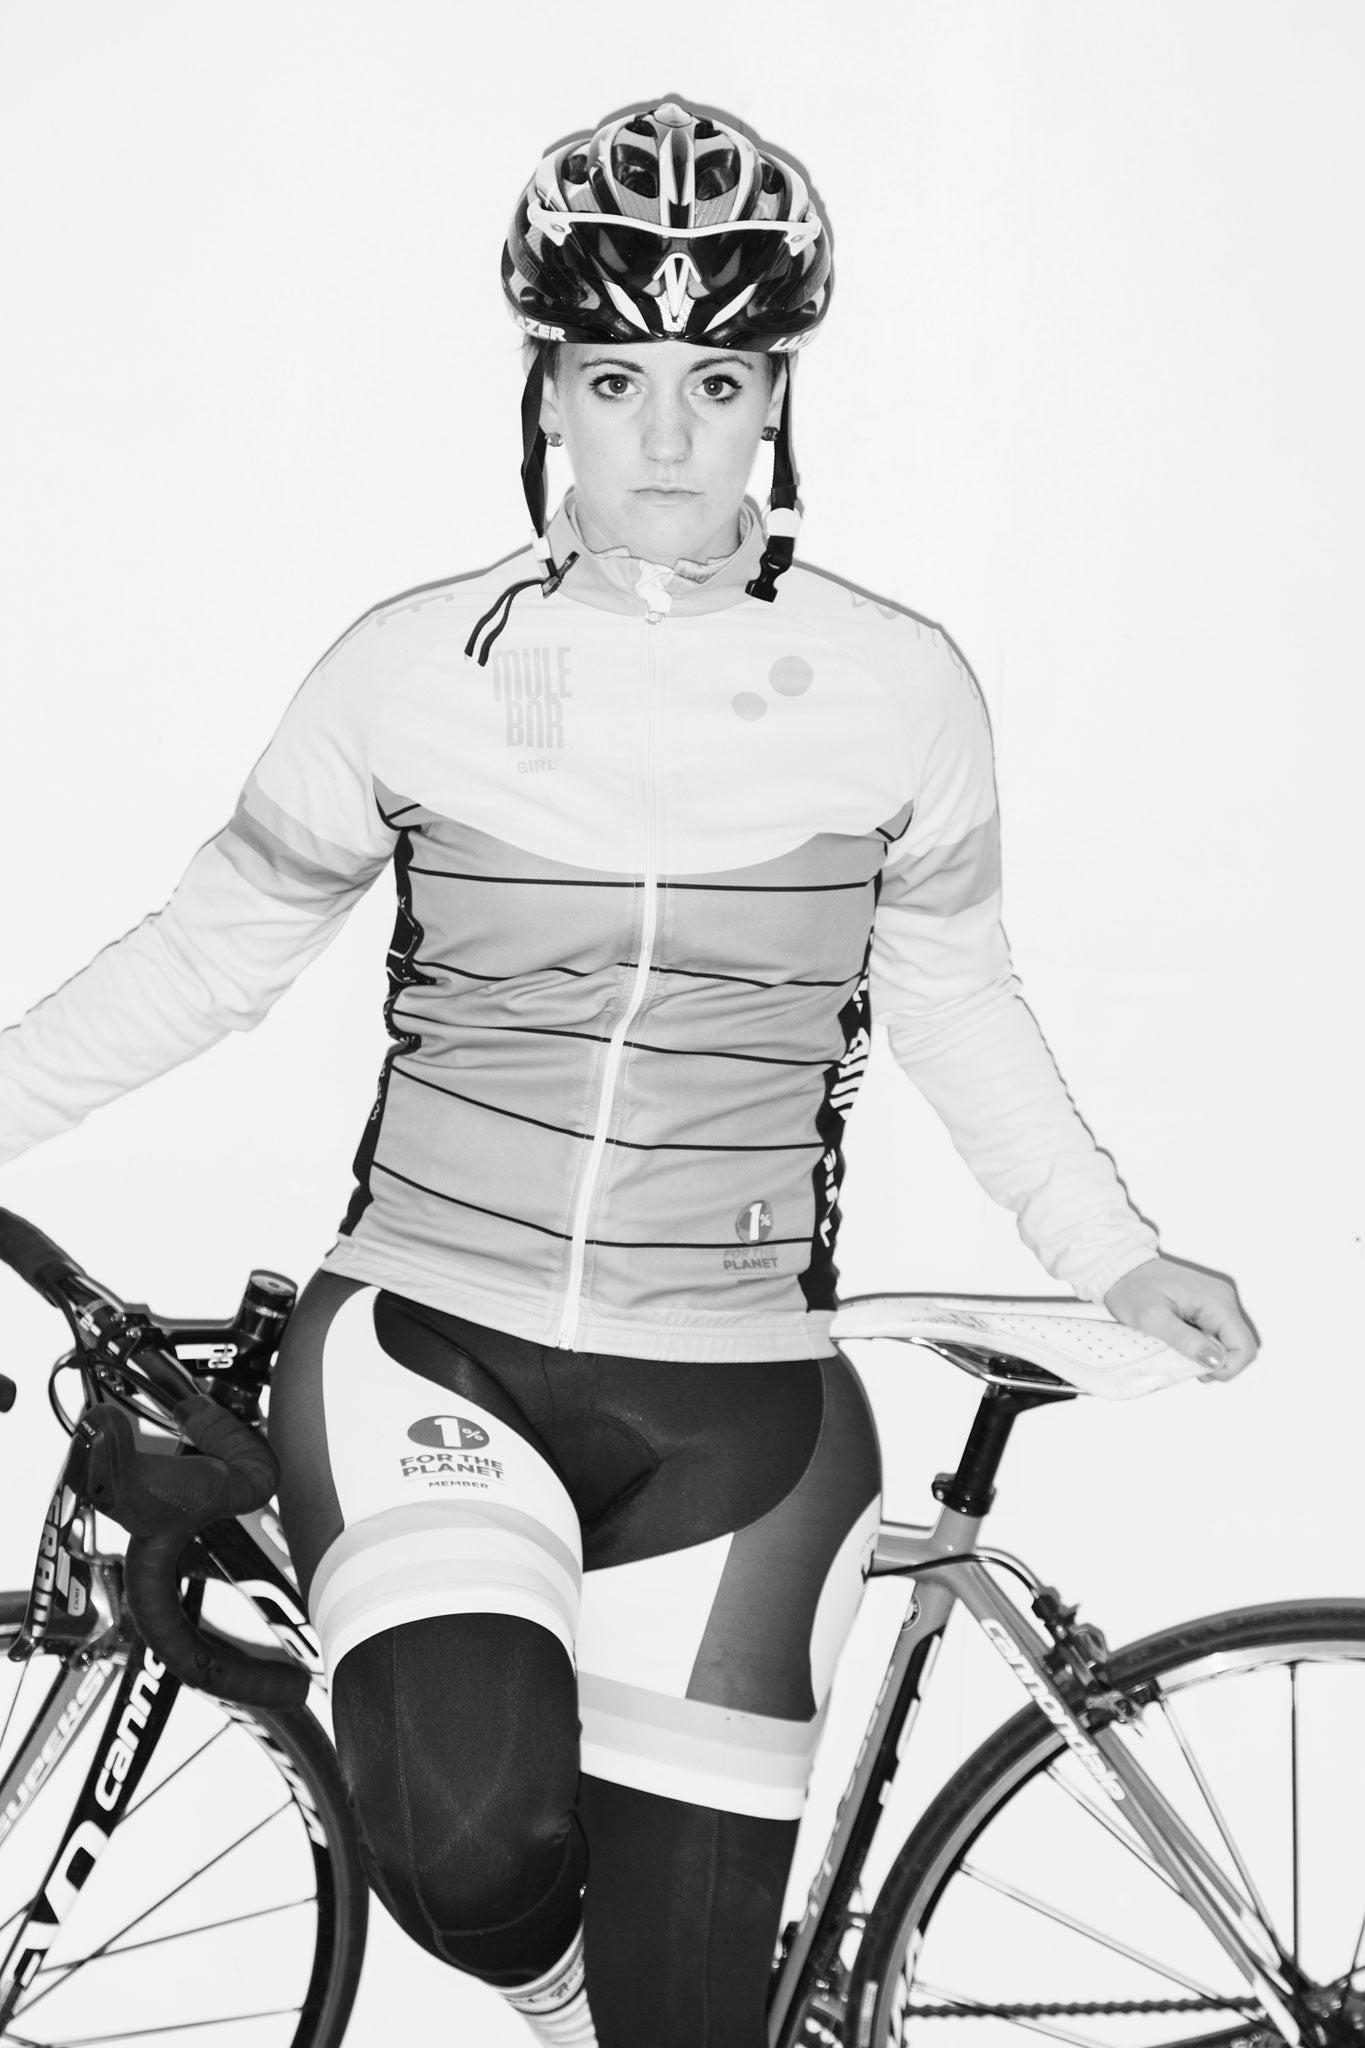 Amateur racer Wiesia Kuczaj, 32, says: 'Women's cycling is growing exponentially. We're also showing that there's a friendly side to the sport - it doesn't have to be macho'